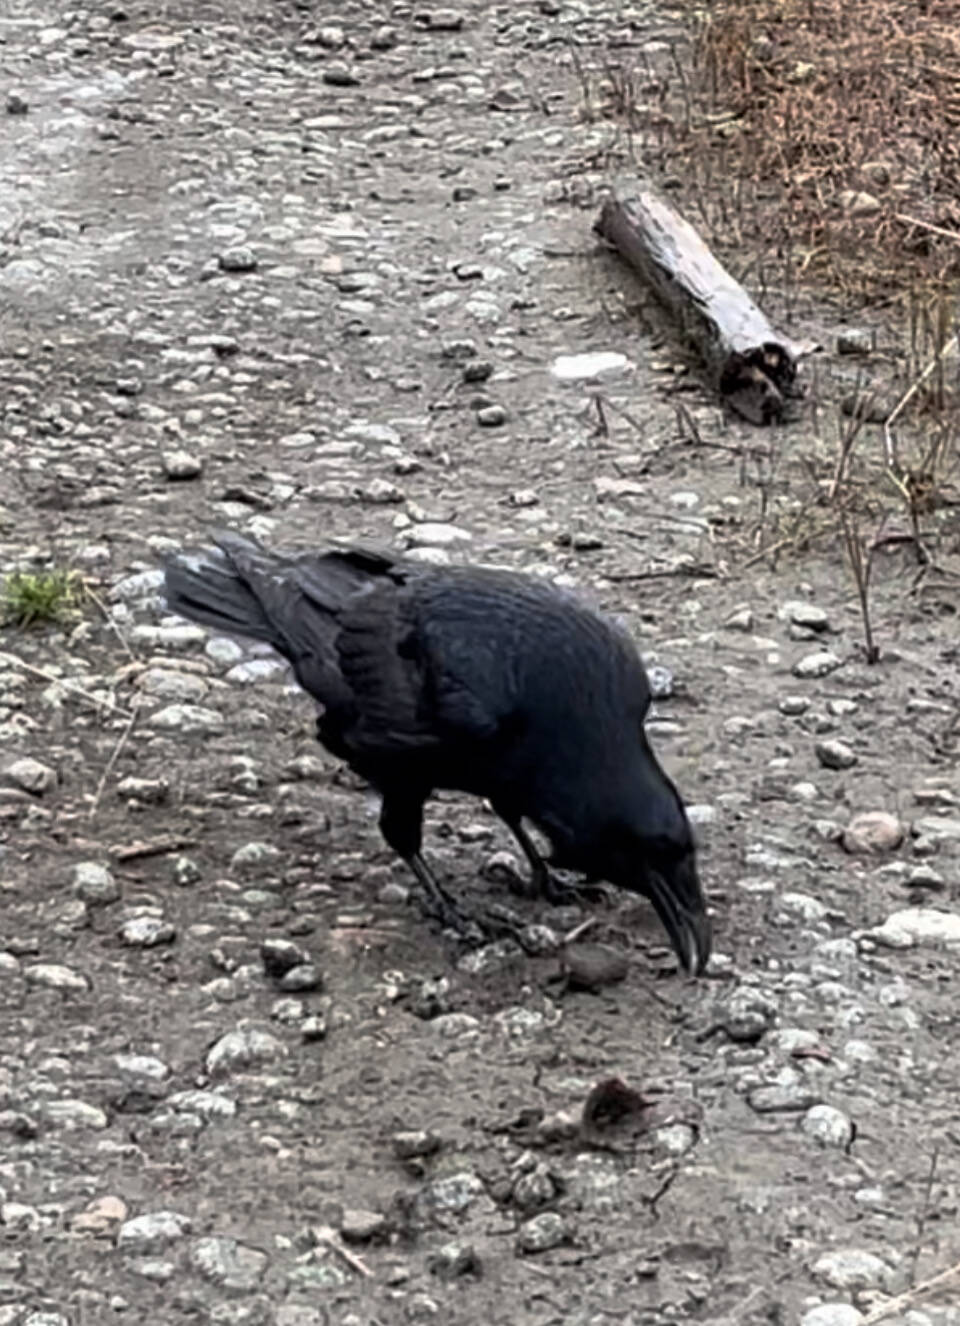 A calm raven foraged for tiny earthworms not far from the observers. (Photo by KMHocker)